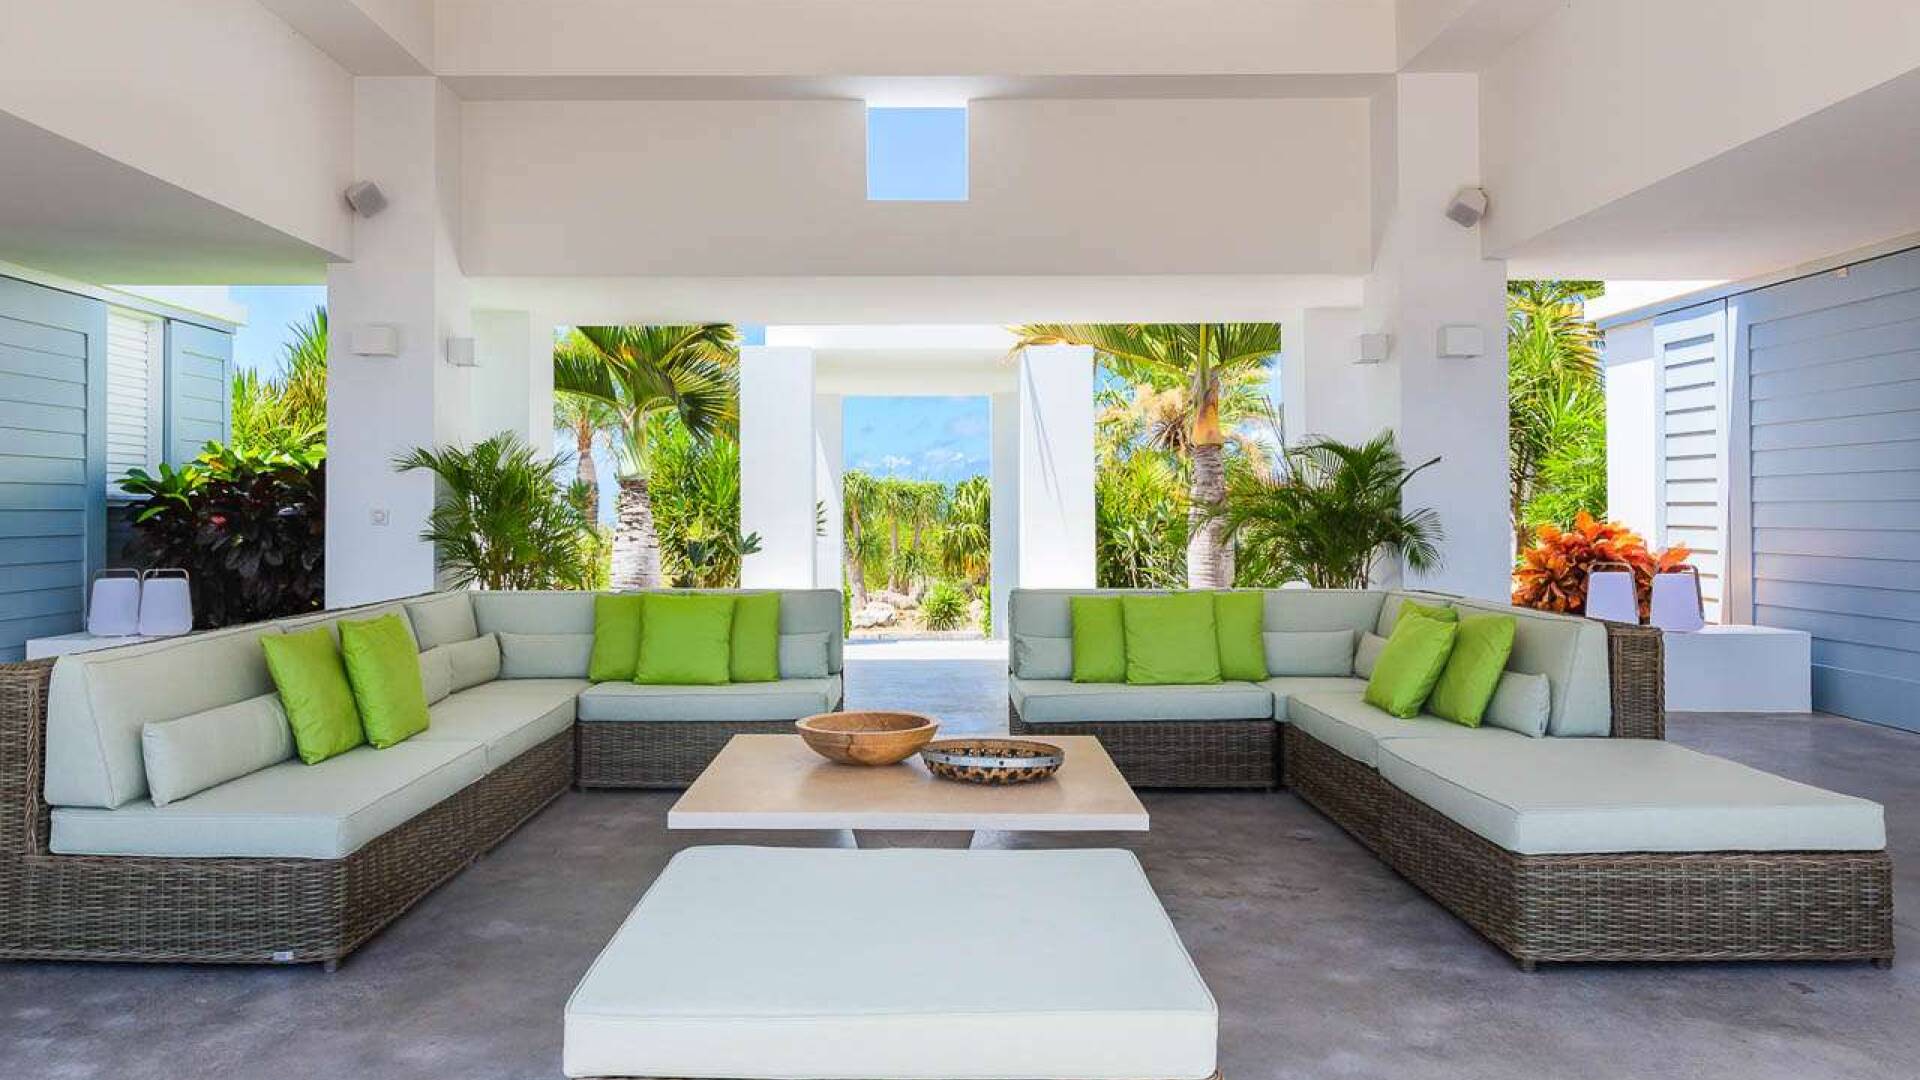 Living Room at WV ECO, Gouverneur, St. Barthelemy